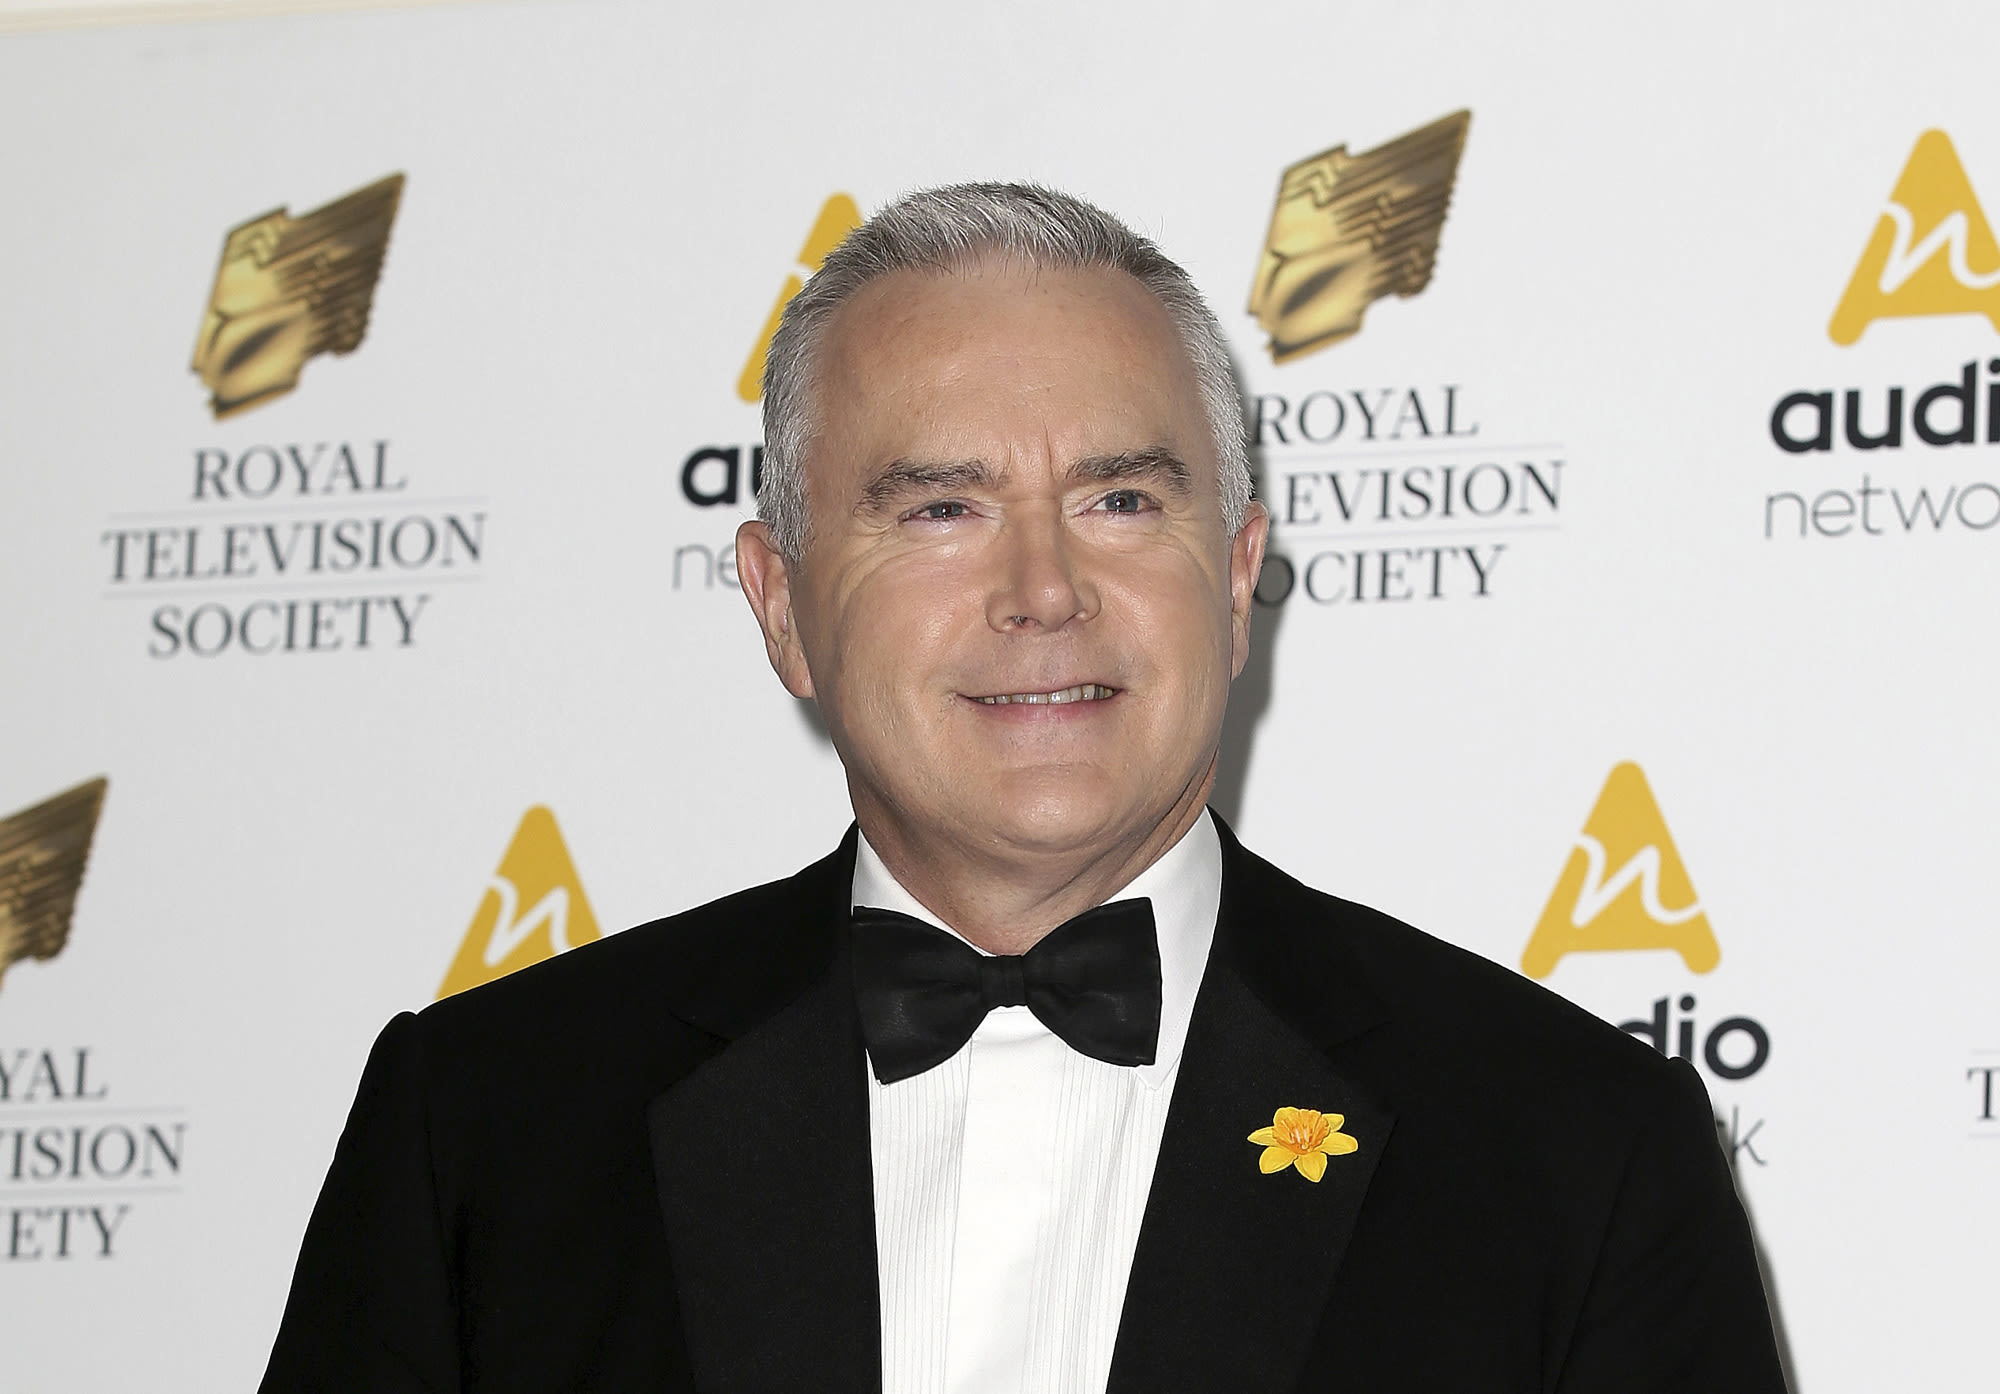 Huw Edwards, former BBC presenter, pleads guilty to making indecent images of children